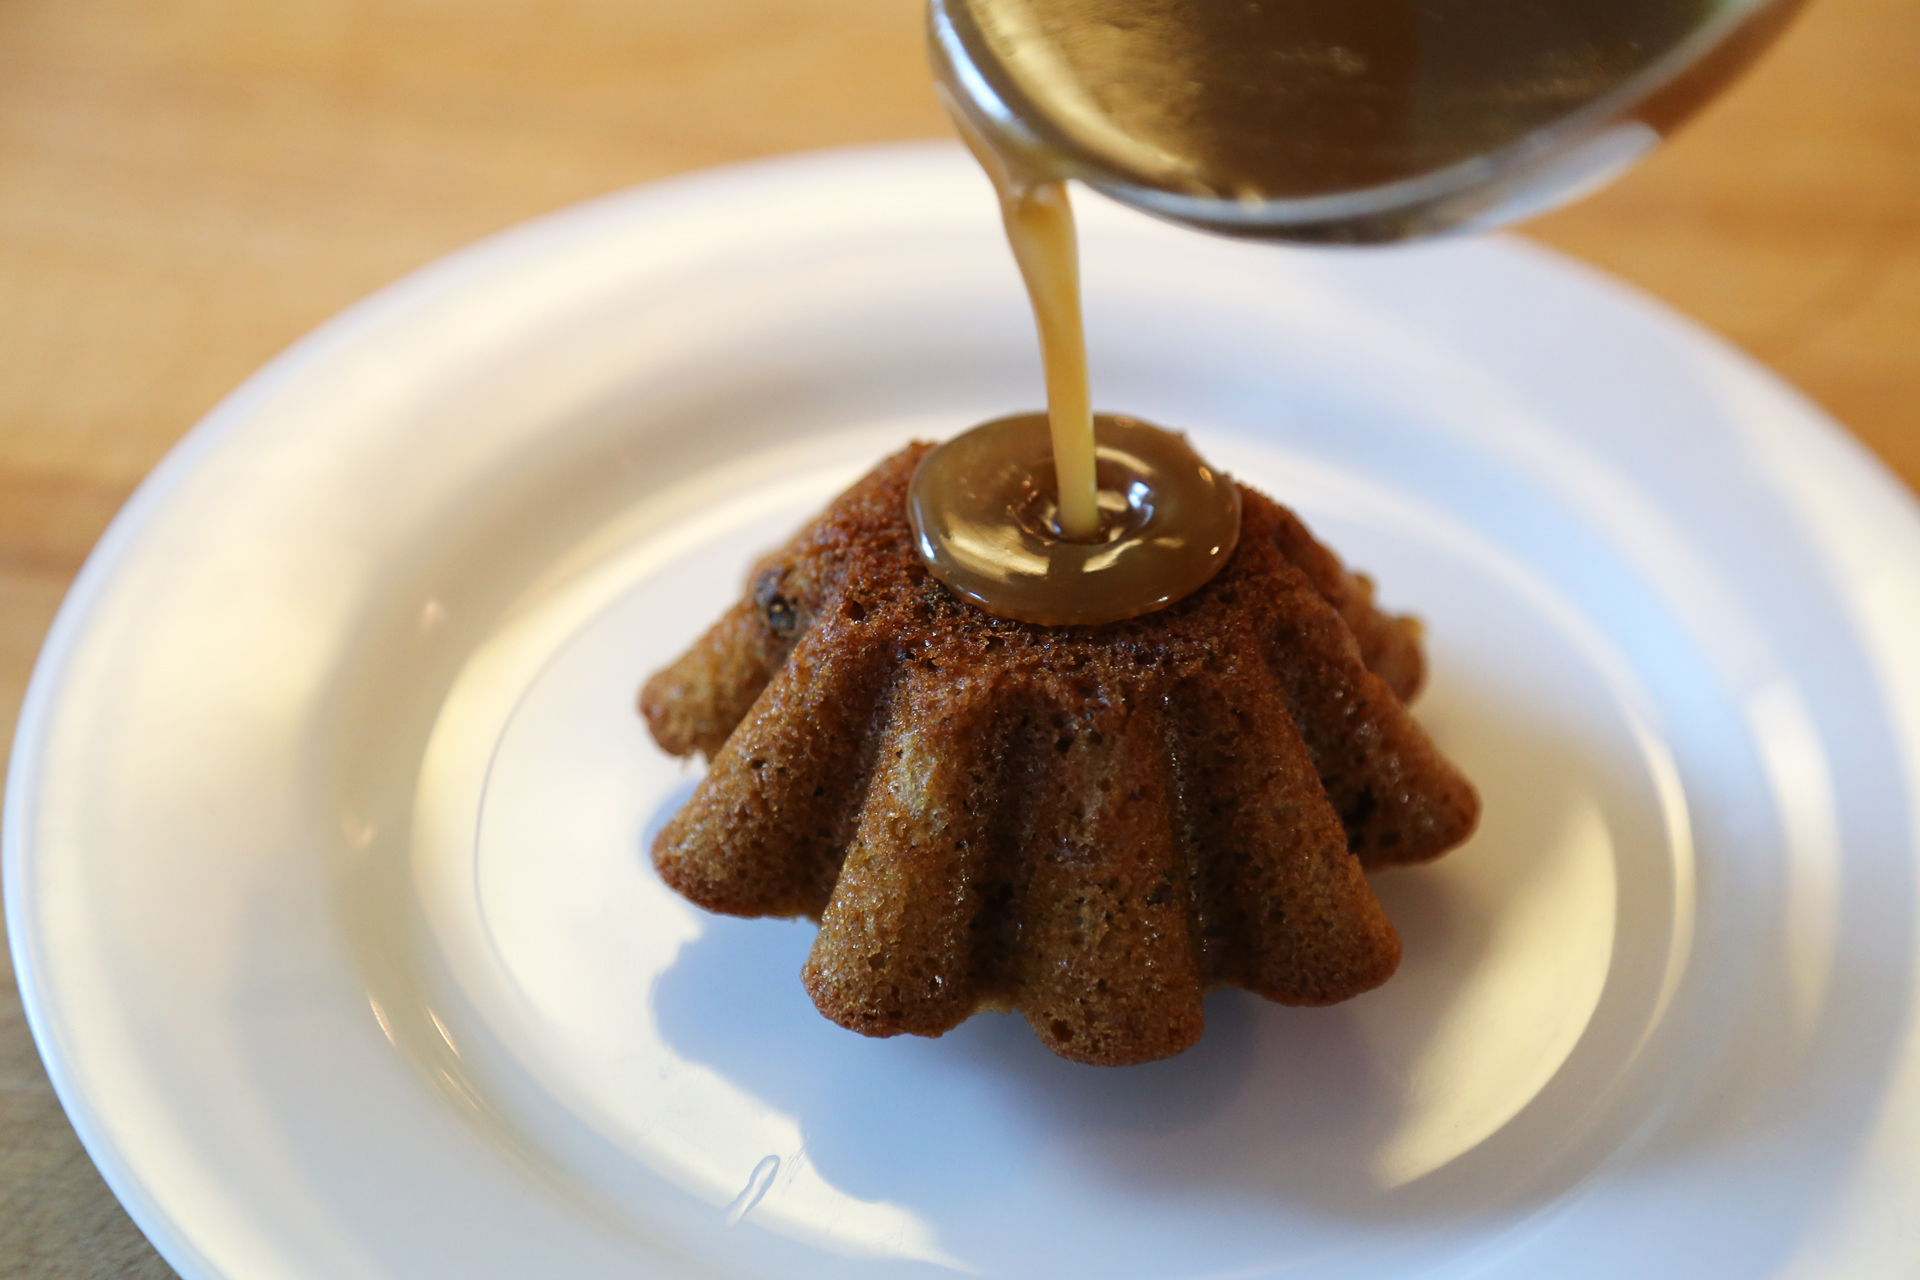 To serve the sticky toffee puddings, unmold each warm pudding onto a plate and top with a big spoonful of the sauce.